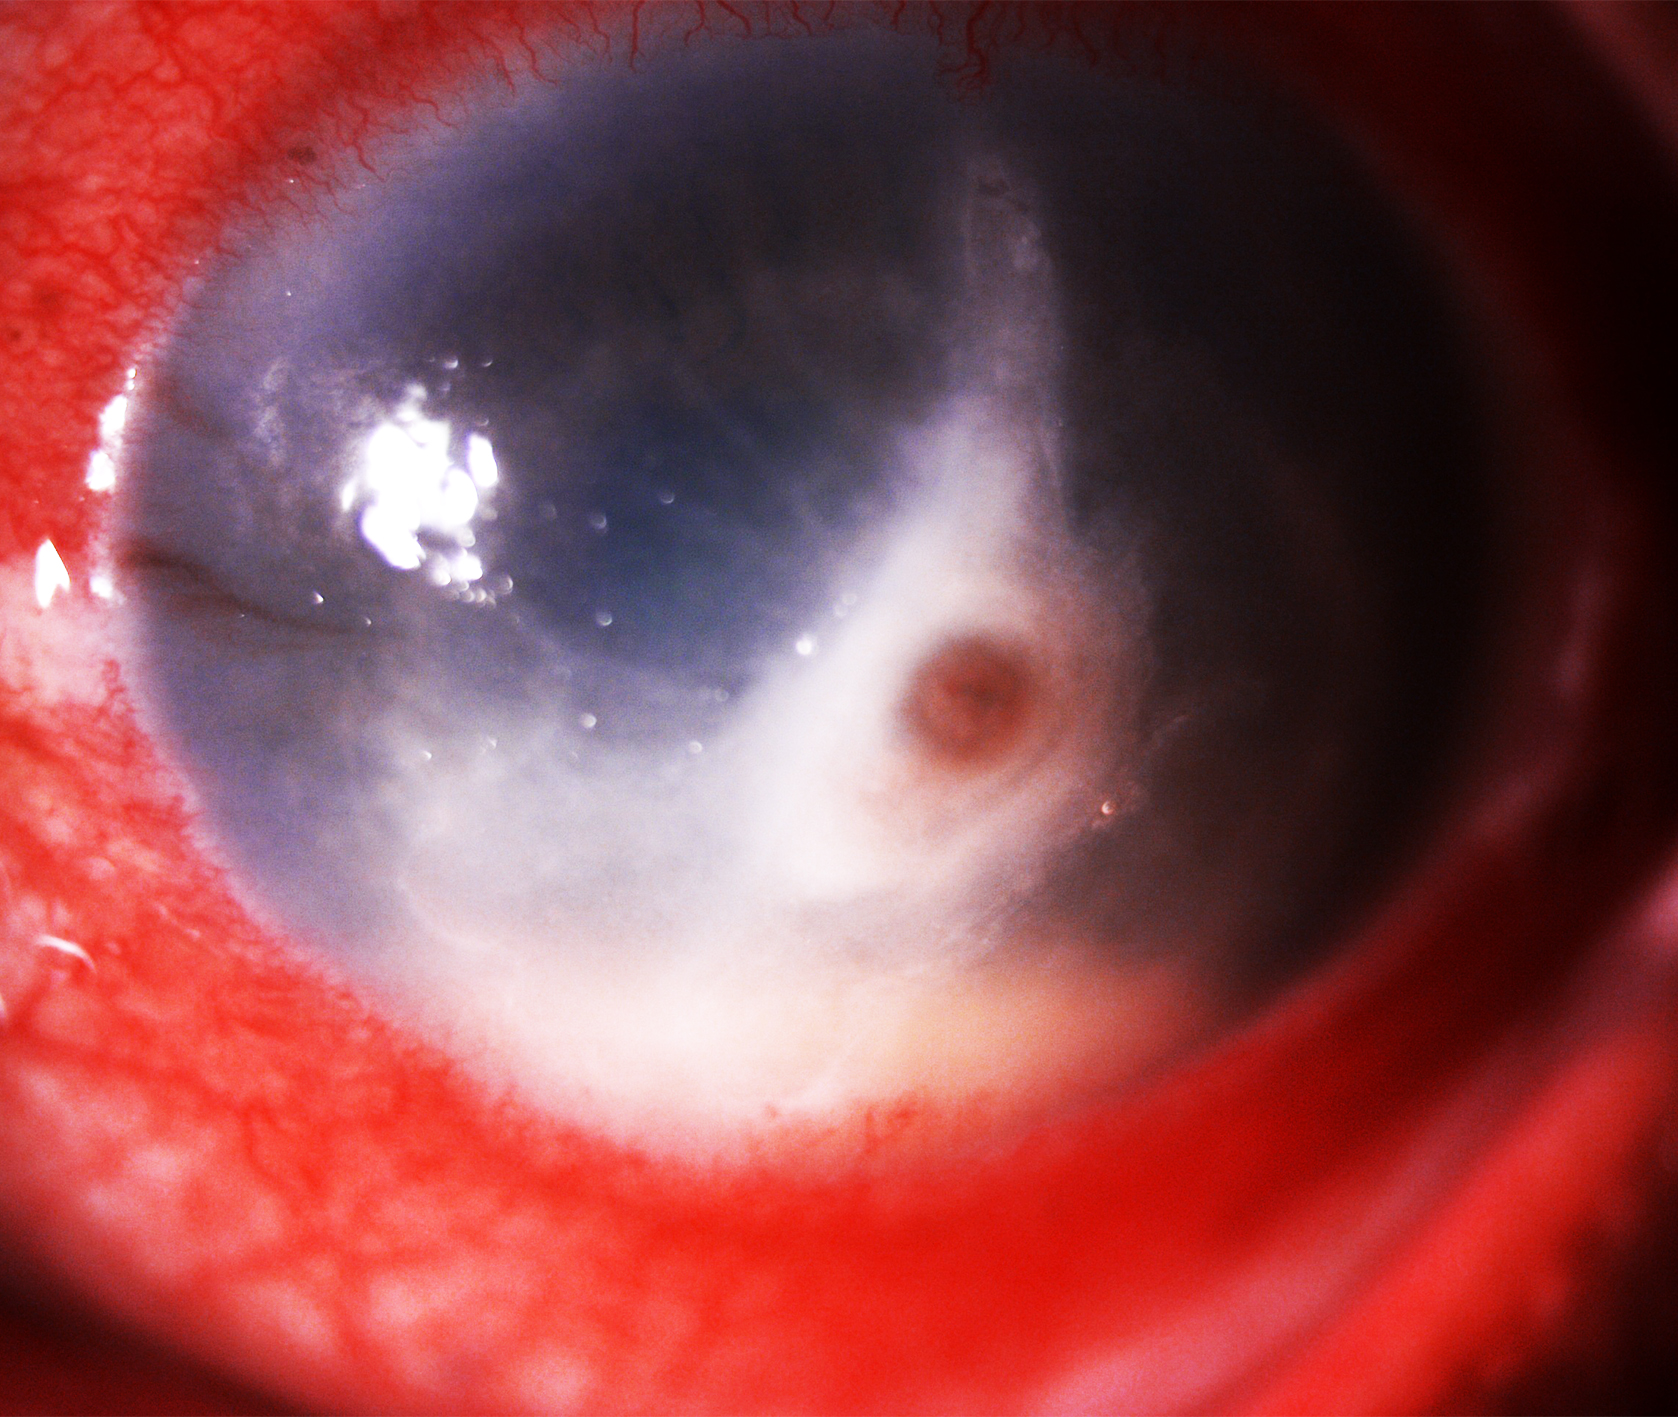 Figure 1-  Slit lamp image depicting conjunctival congestion, 4x3 mm central full thickness infiltrate with corneal perforation, few tentacular projections, inferior limbal spread of infiltrate with anterior chamber hypopyon suggestive of Pythium keratitis